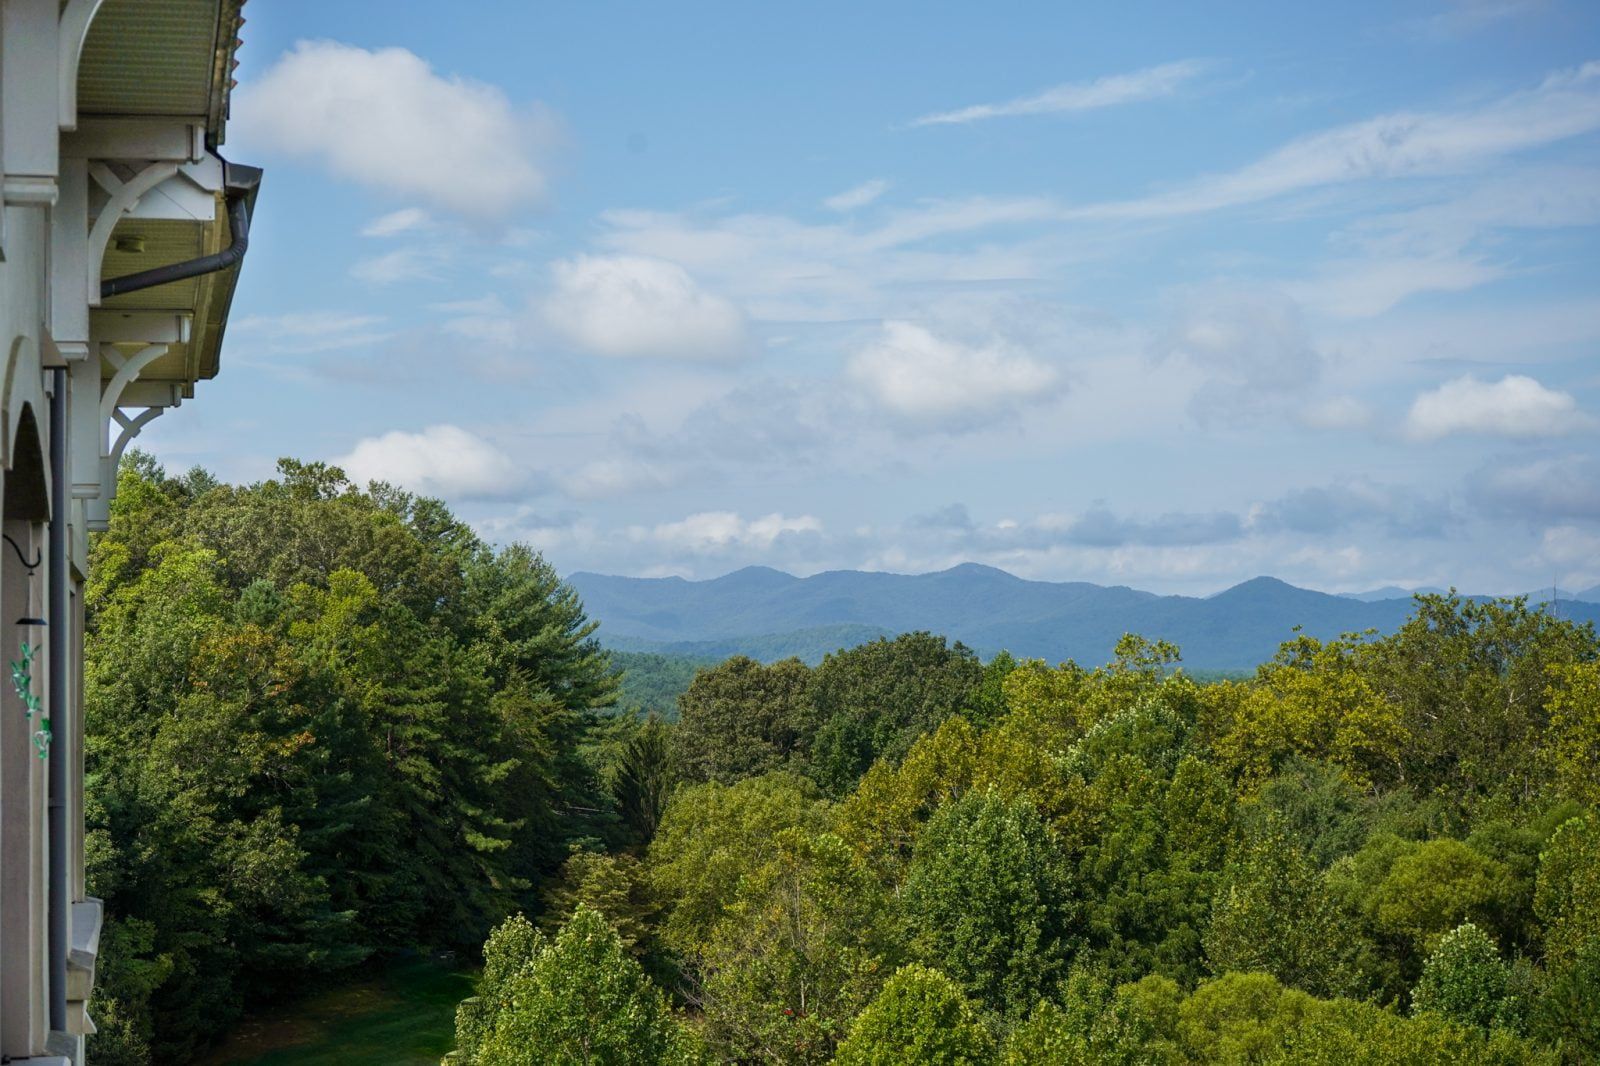 The picture shows mountain views from Givens Estates' campus